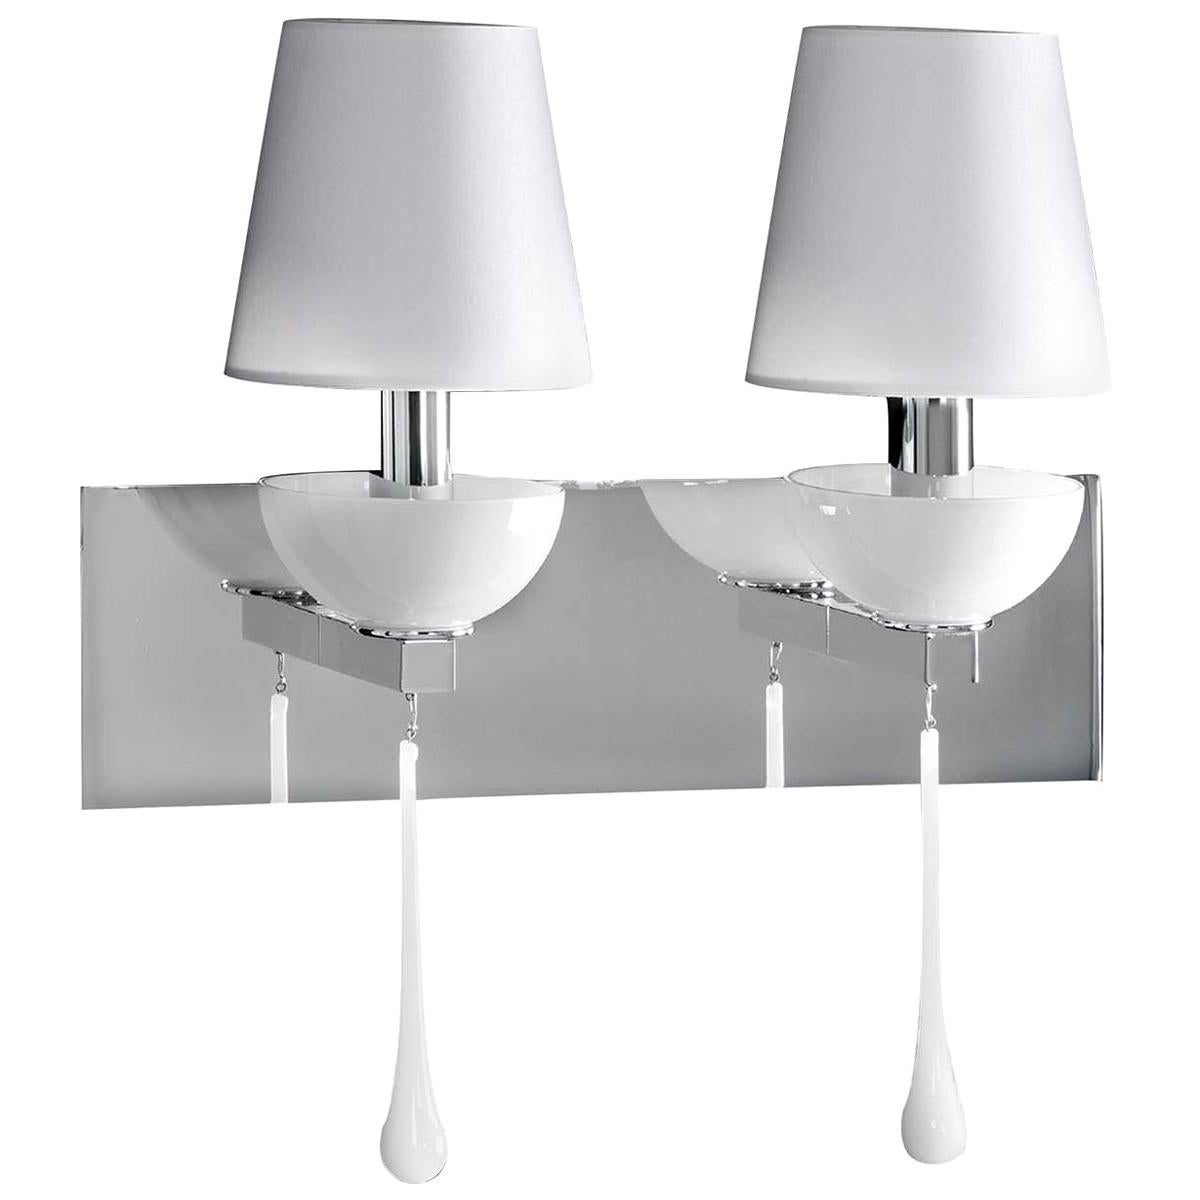 Sinfonia 2-Light Sconce For Sale